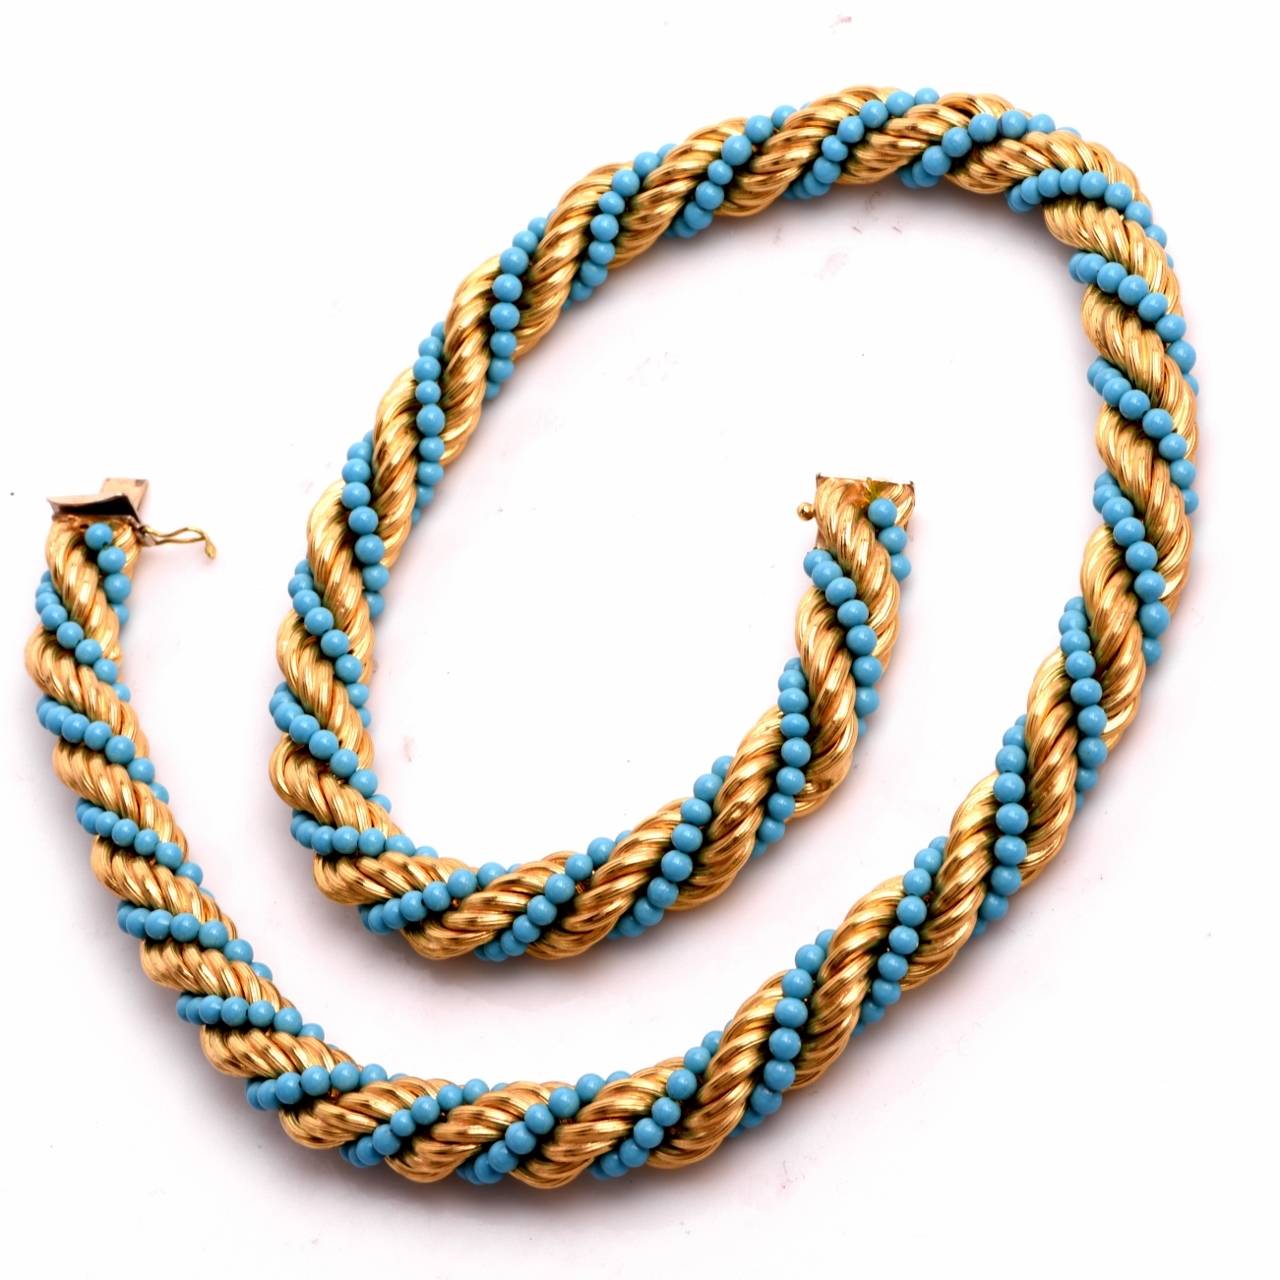 This eye-catching vintage necklace of vivacious aesthetic and immaculate workmanship   is composed of  well-matched  turquoise beads measuring 2 mm in diameter, interwoven with artfully twisted yellow gold wire.It weighs approx. 96.00 grams and